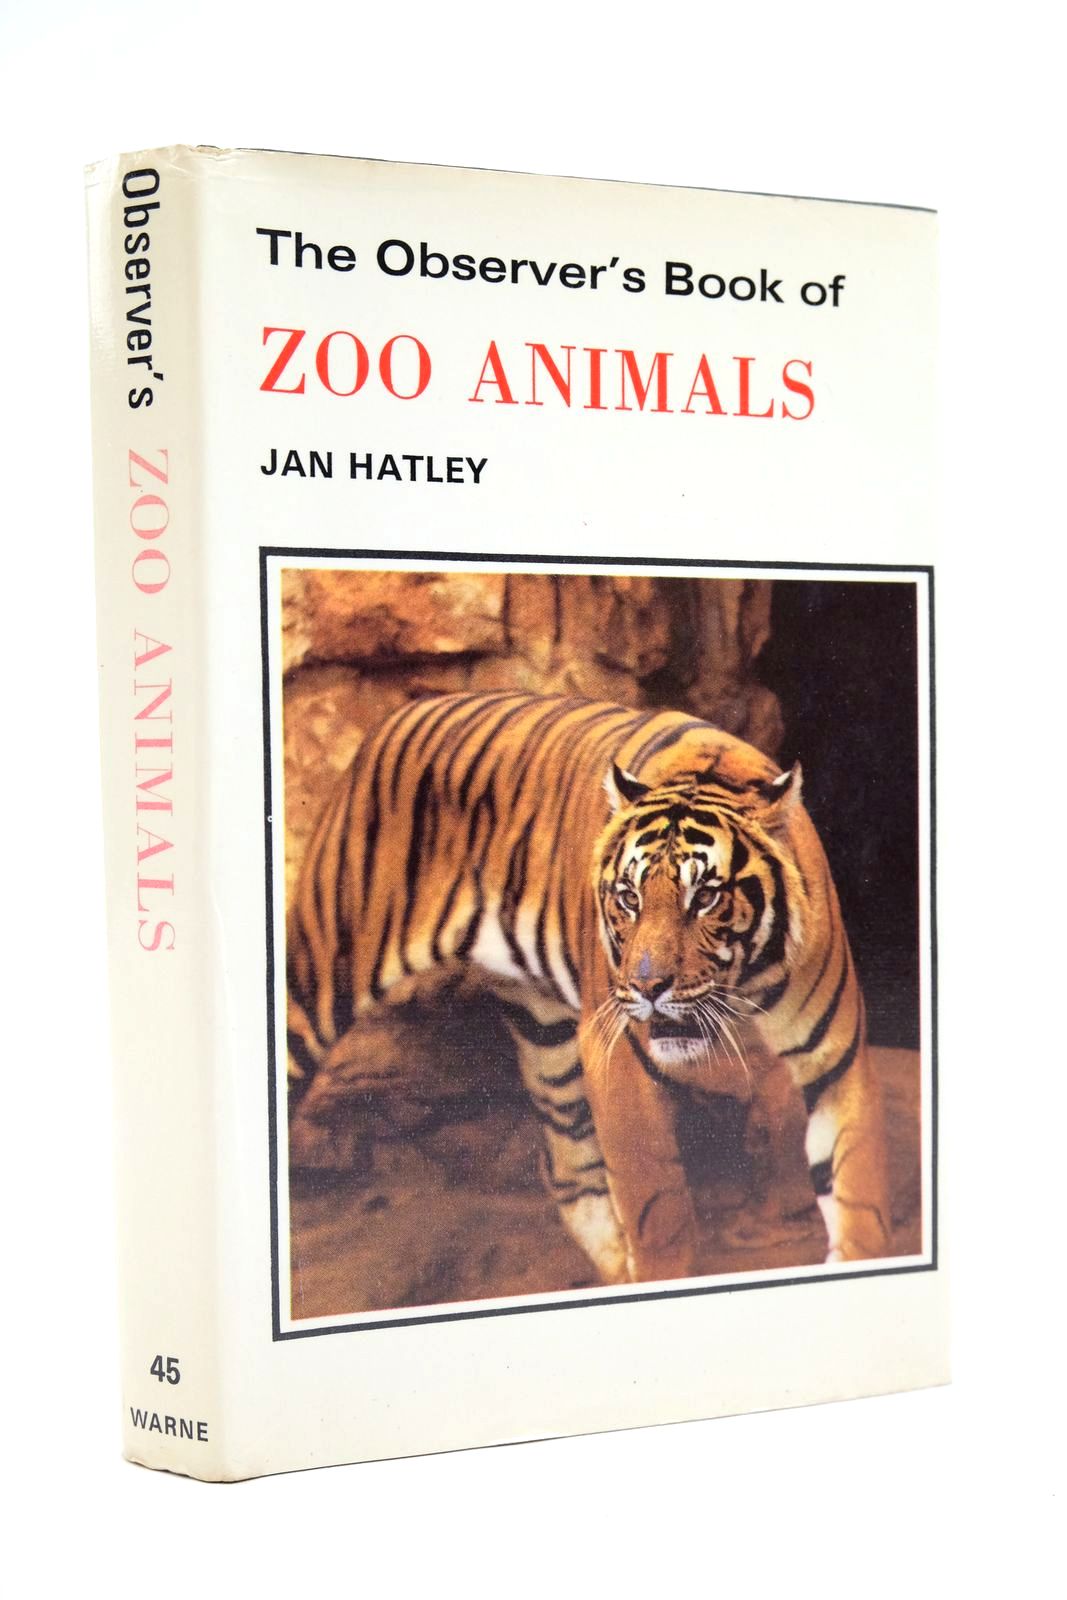 Photo of THE OBSERVER'S BOOK OF ZOO ANIMALS written by Hatley, Jan published by Frederick Warne (STOCK CODE: 2139499)  for sale by Stella & Rose's Books